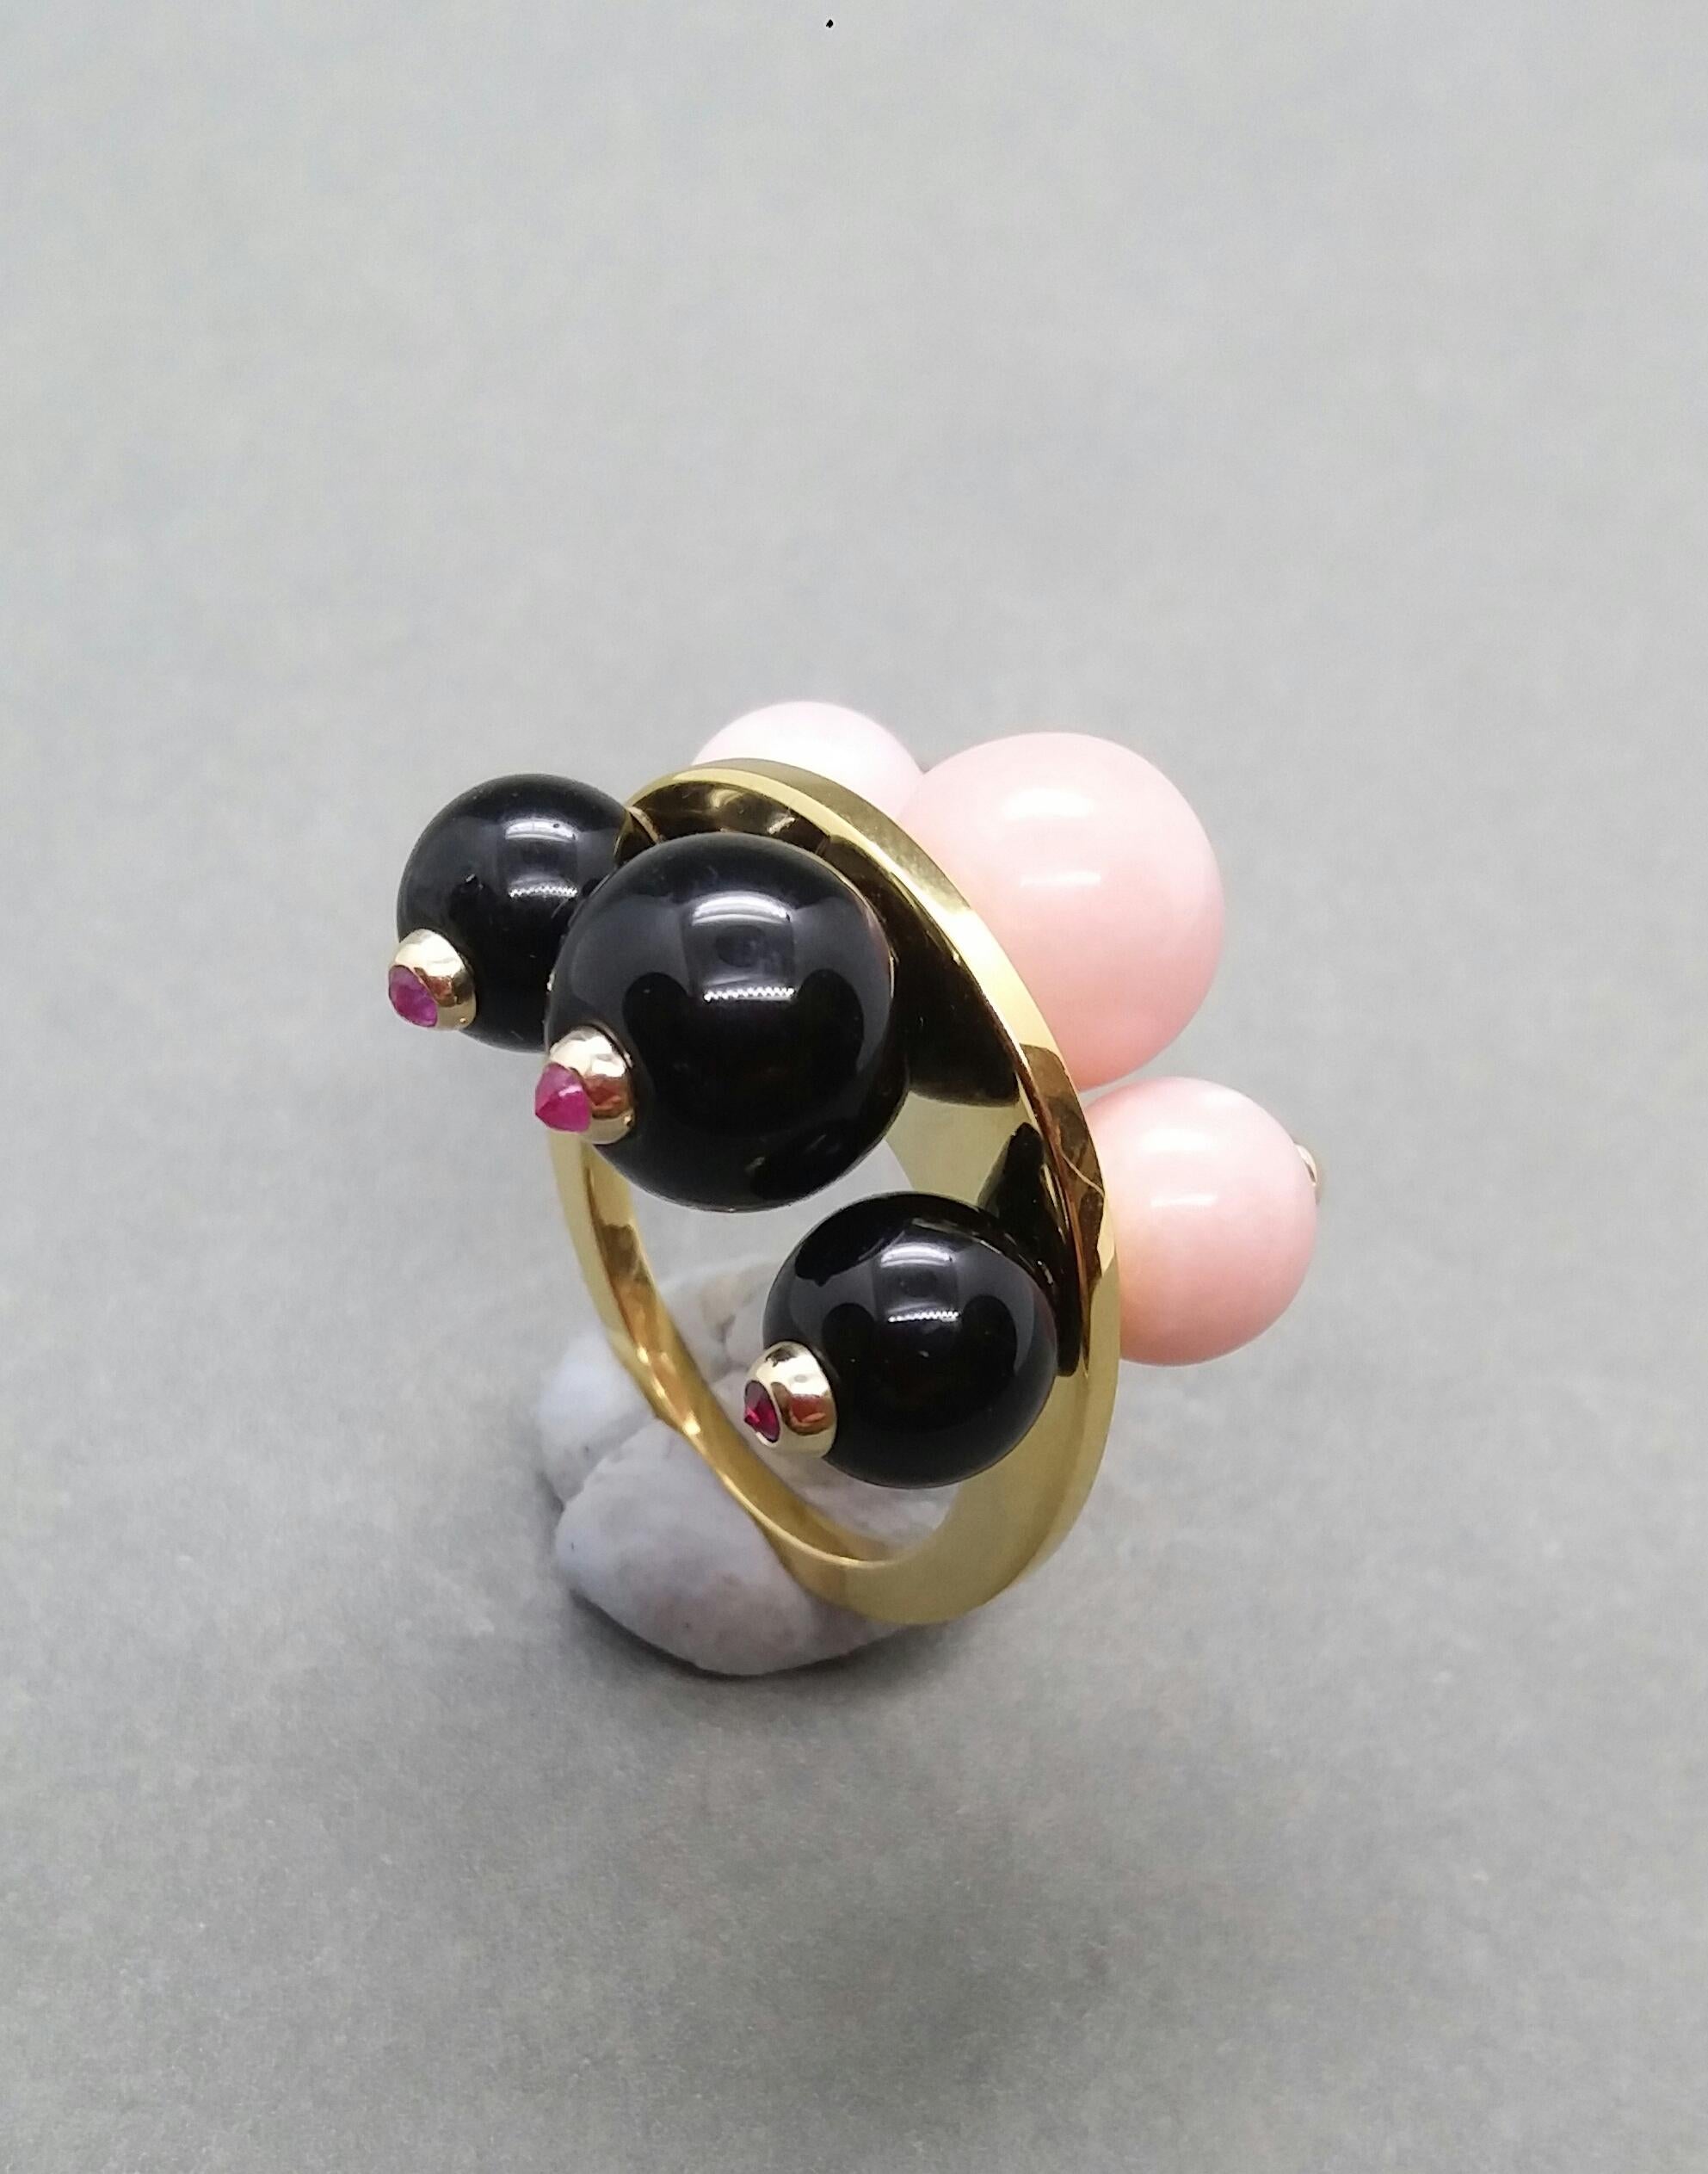 14 Karat Gold Black Onyx and Pink Opal Round Beads Rubies Black Diamonds Ring For Sale 1